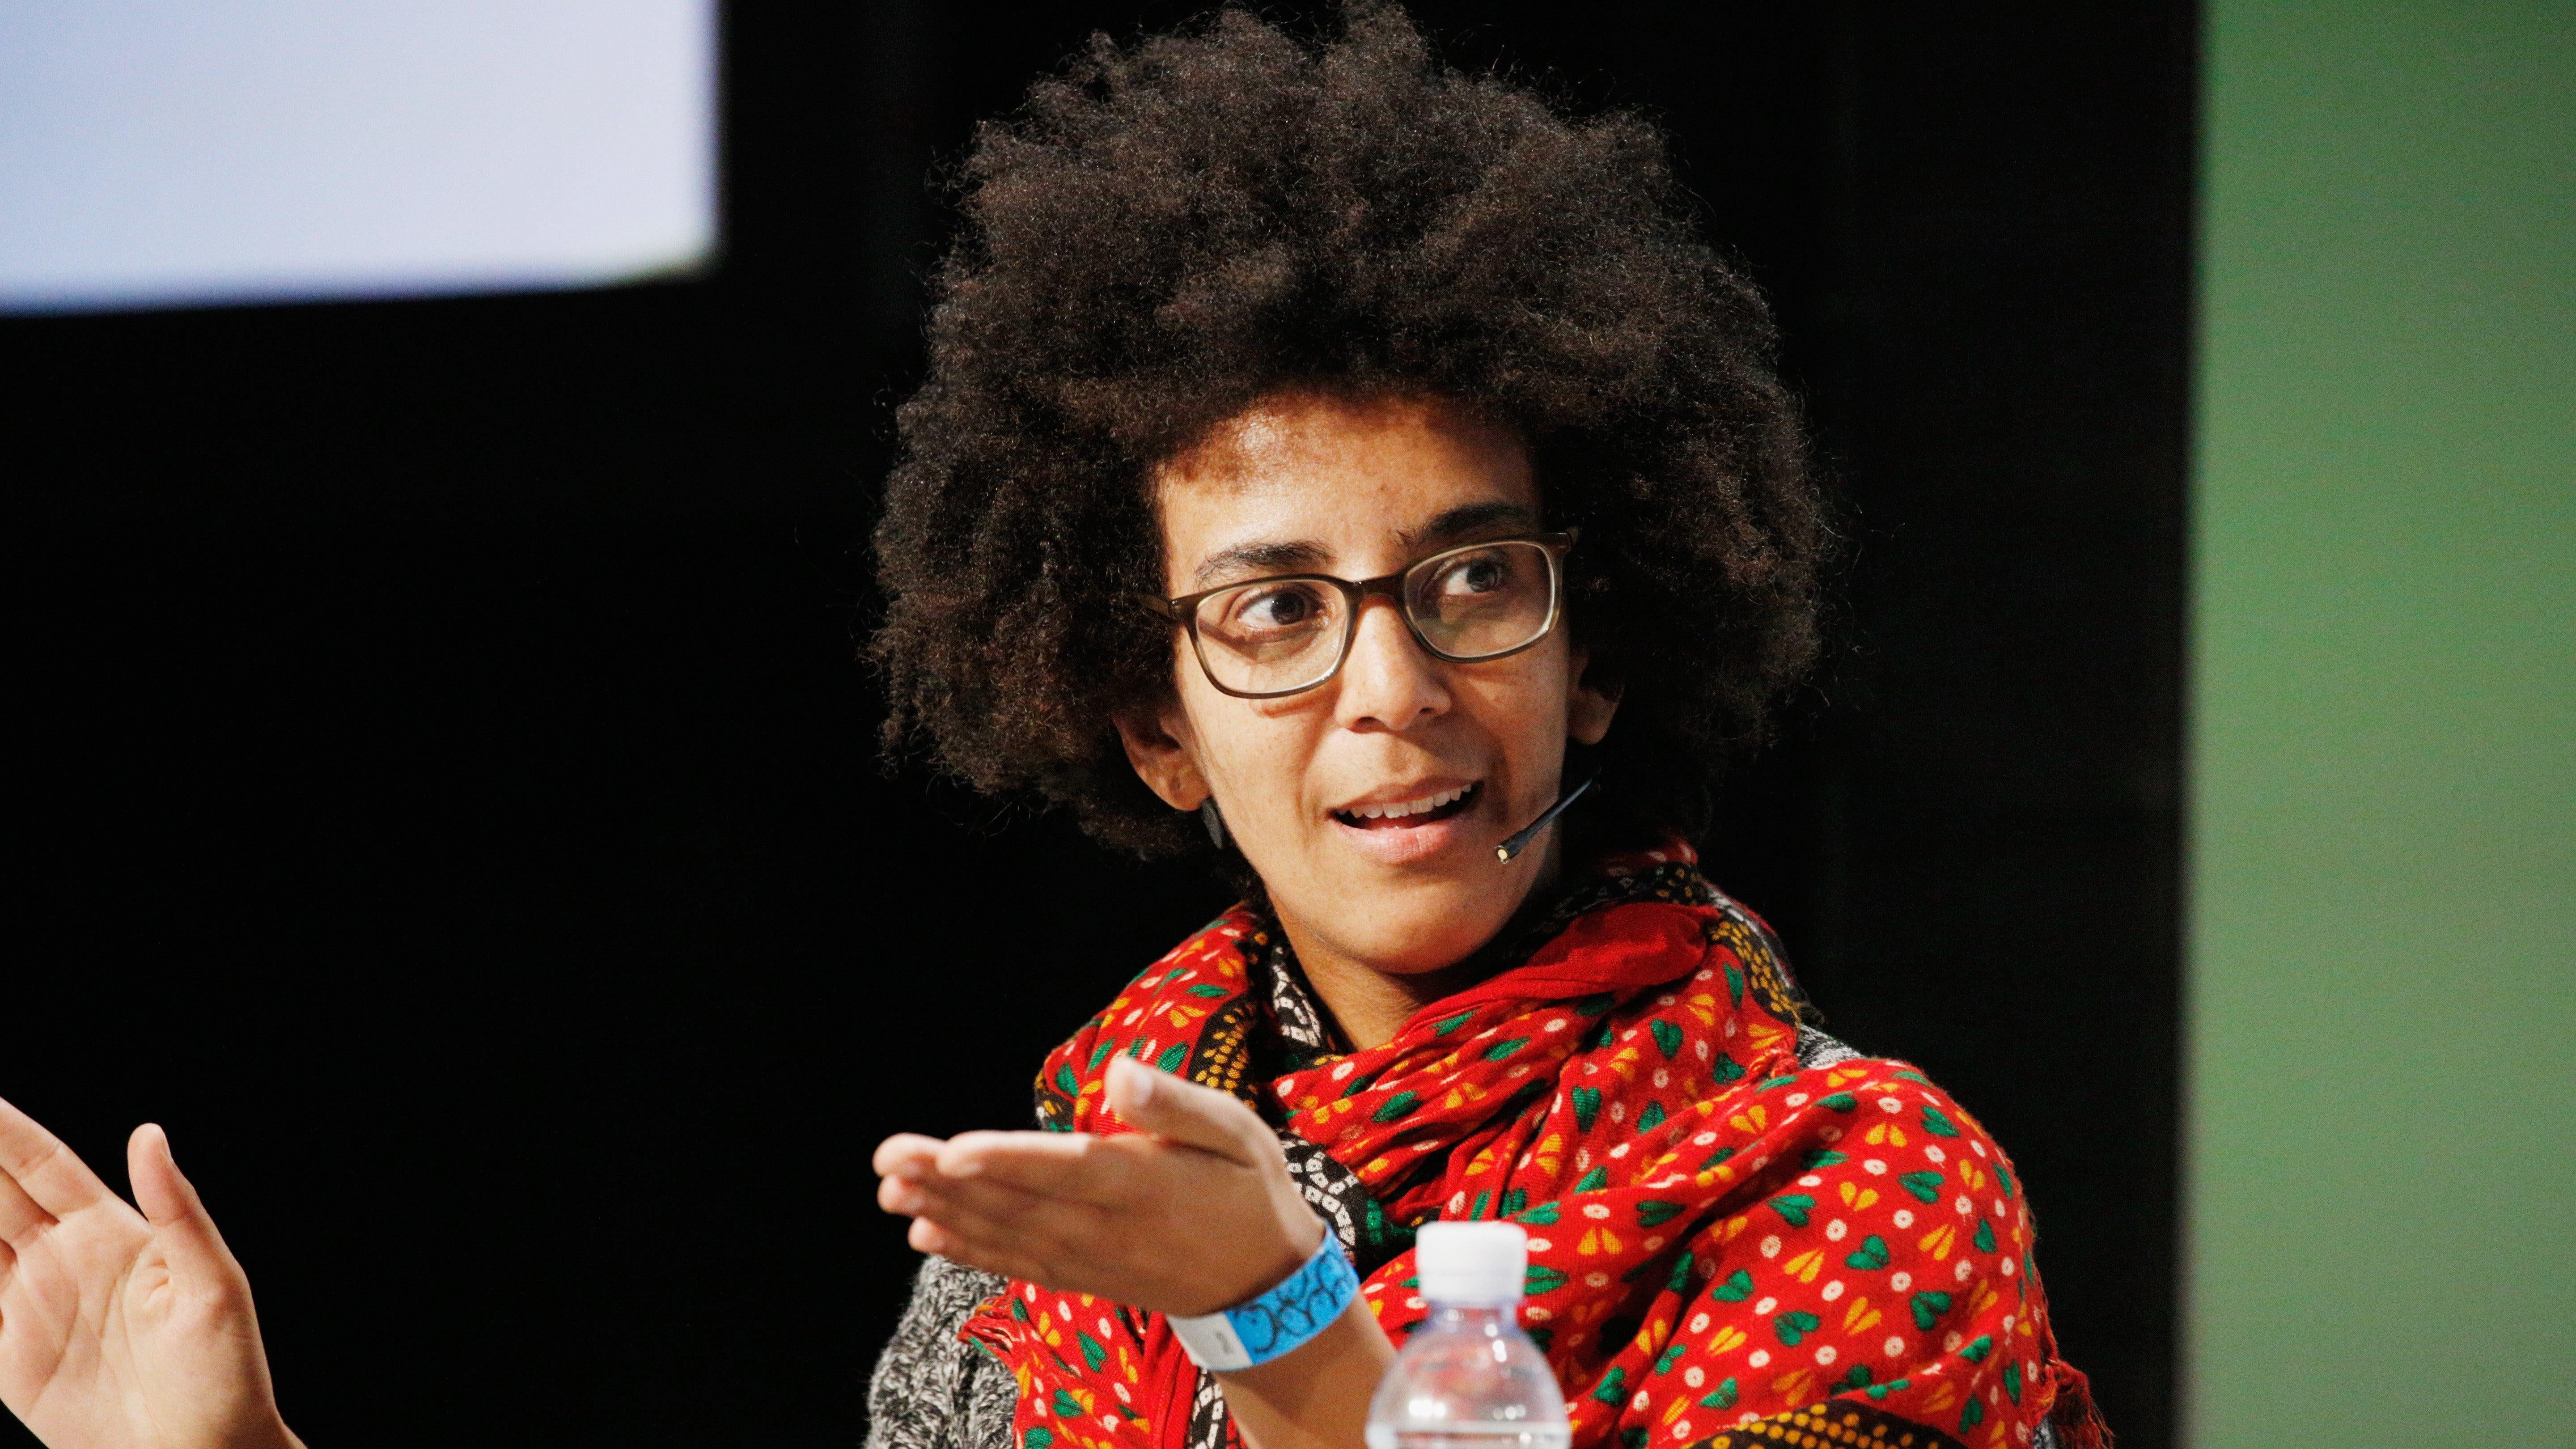 Google AI Research Scientist Timnit Gebru speaks onstage during Day 3 of TechCrunch Disrupt SF 2018 at Moscone Centre on September 7, 2018 in San Francisco, California.  (Photo: Kimberly White, Getty Images)